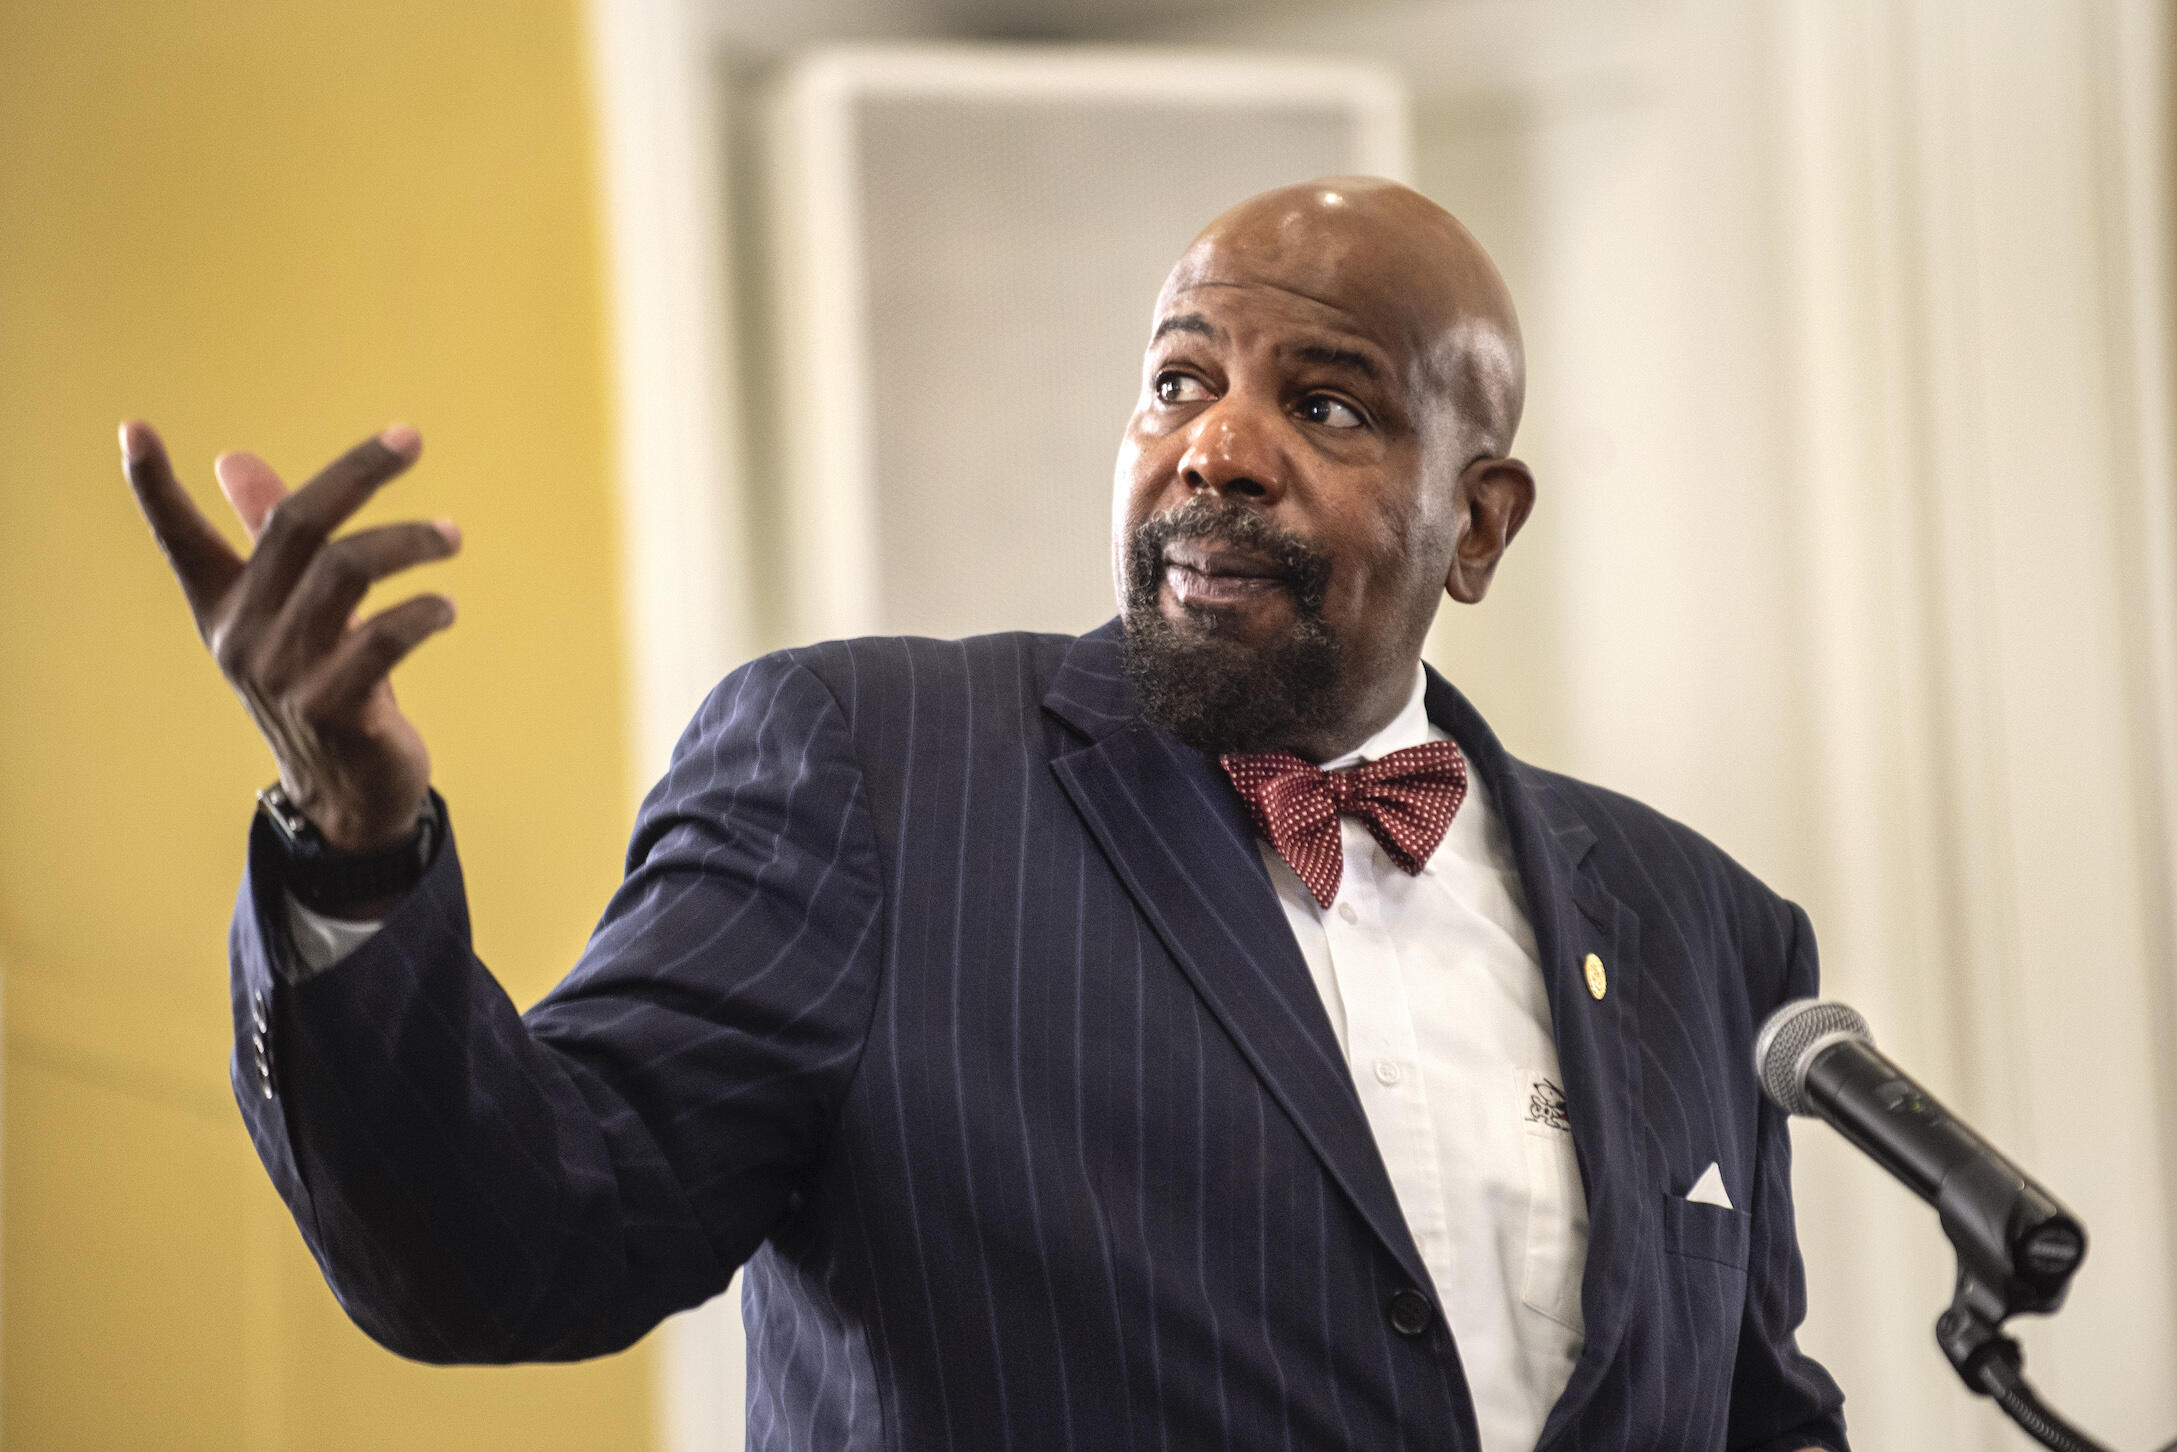 Cato Laurencin speaking at a conference.